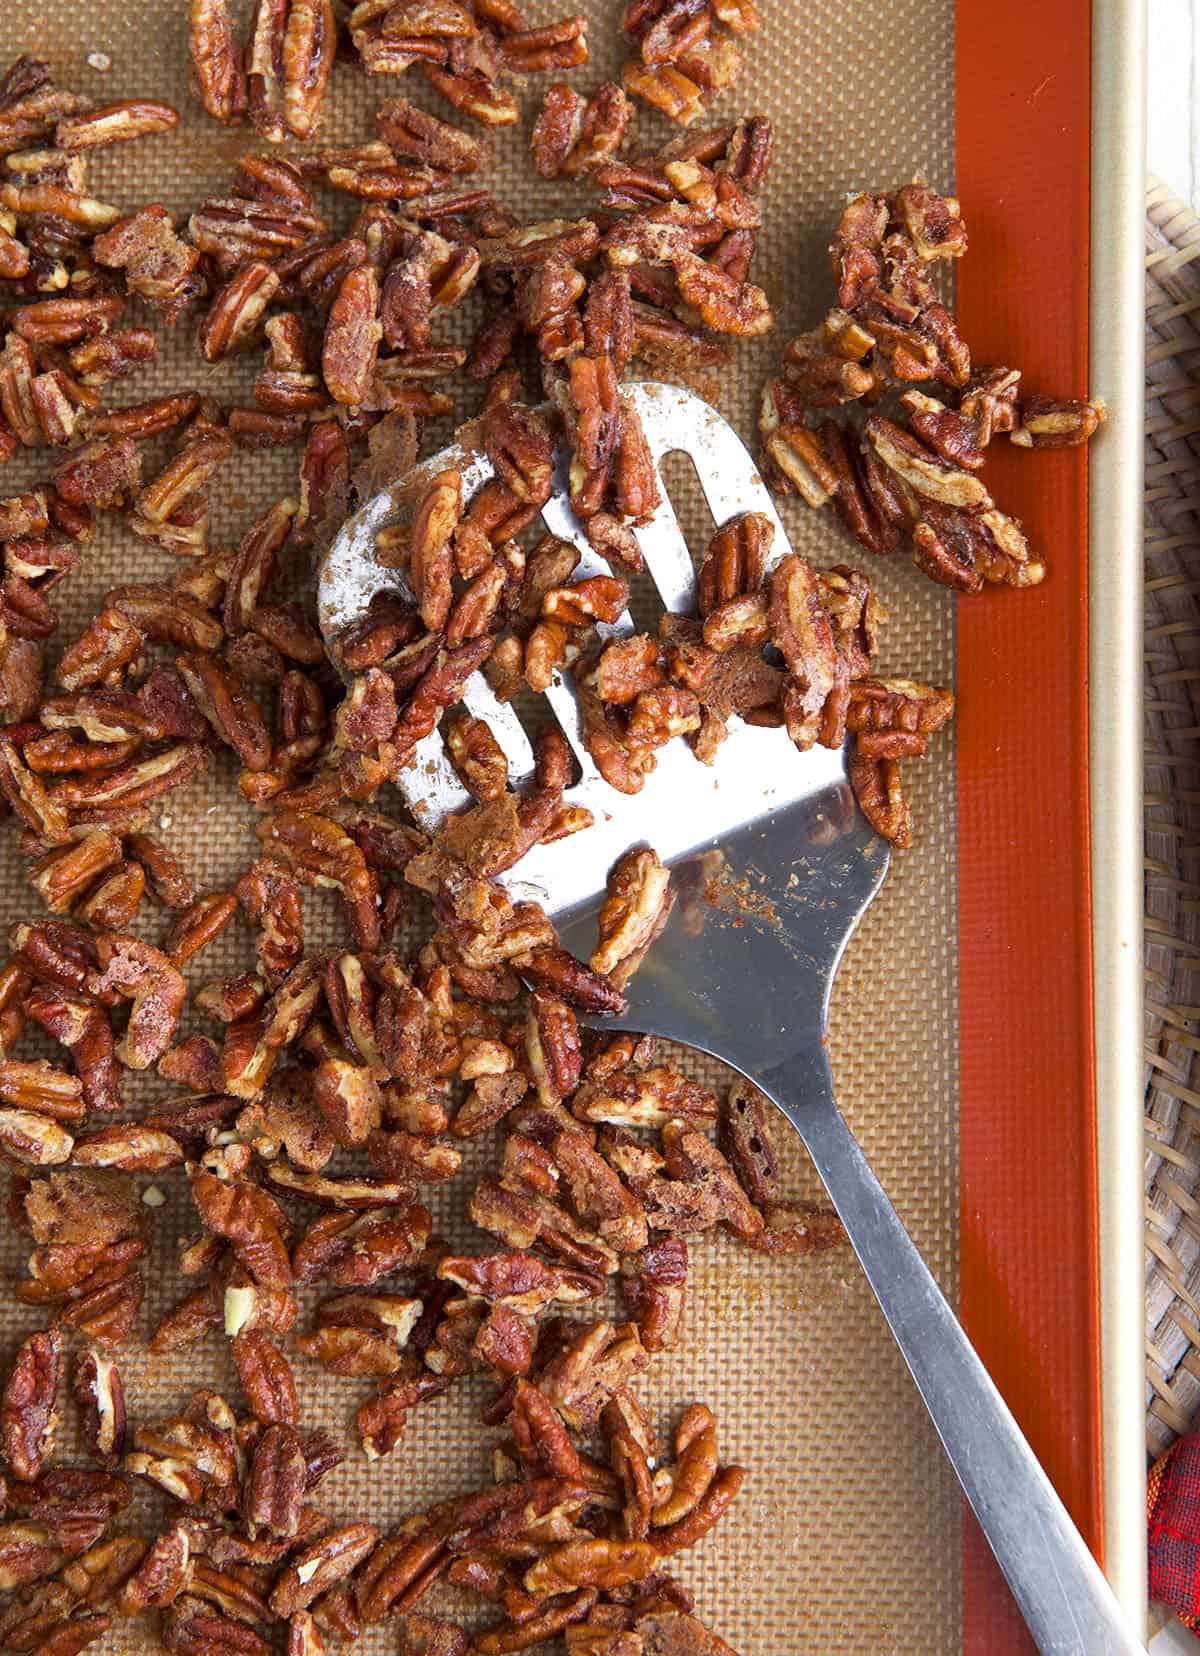 Candied pecans have been roasted on a baking sheet.